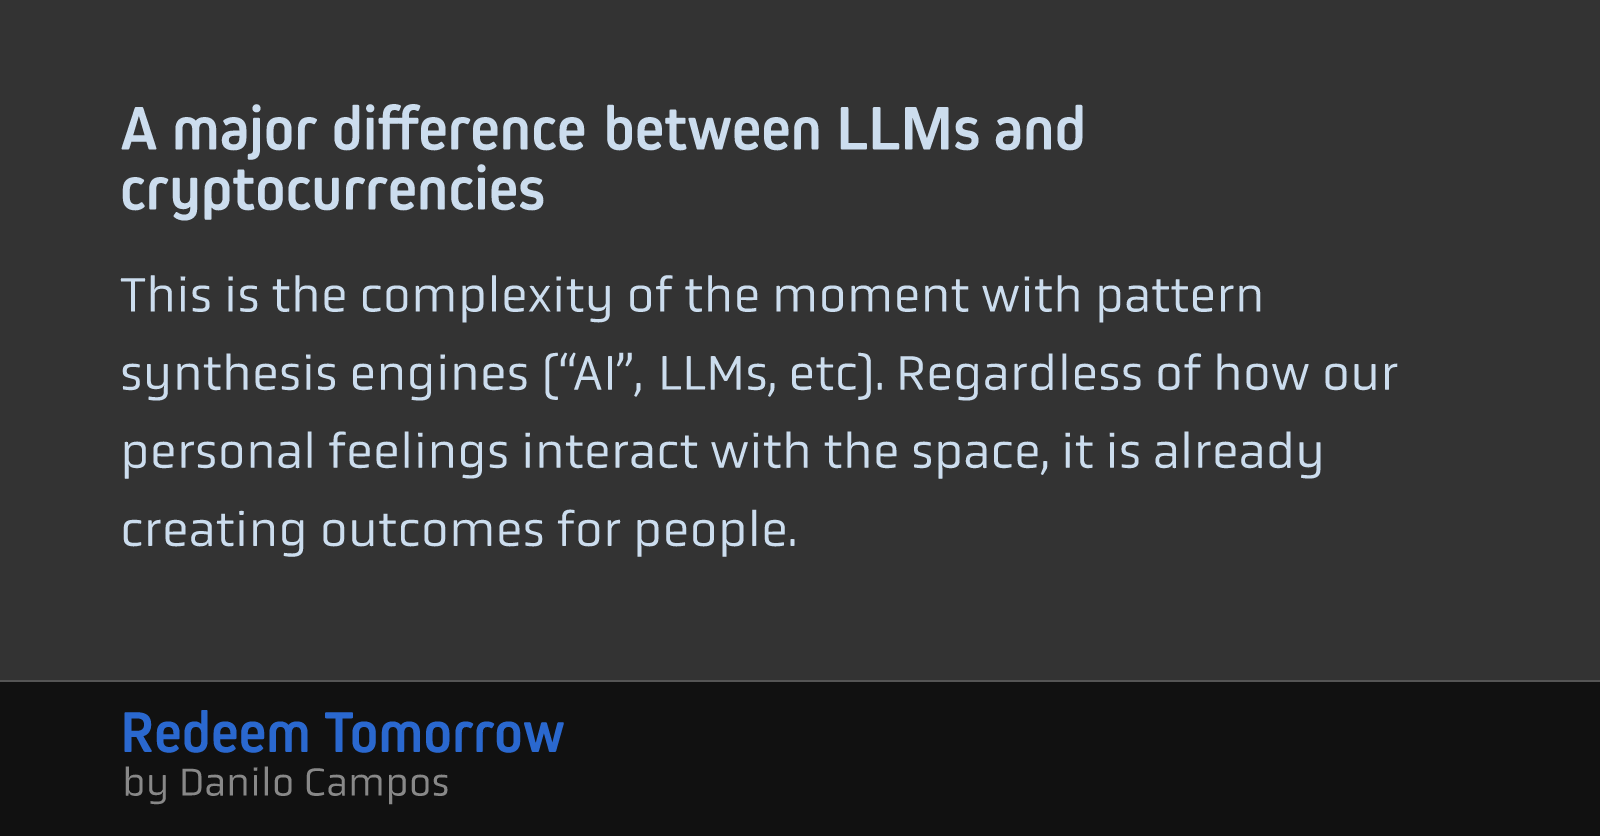 A major difference between LLMs and cryptocurrencies